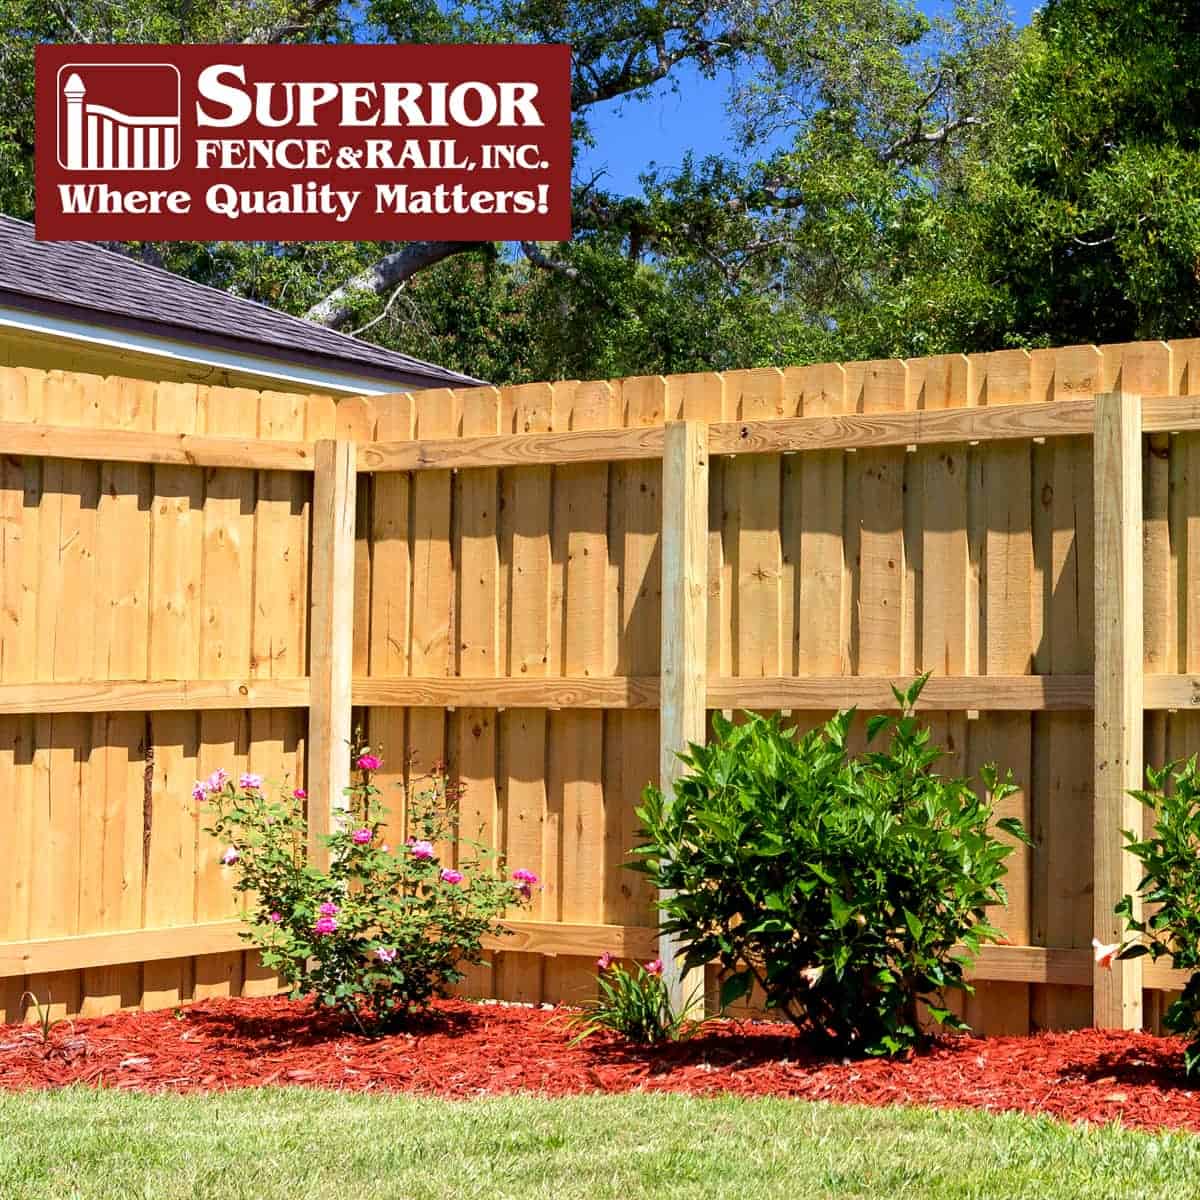 https://www.superiorfenceandrail.com/wp-content/uploads/2022/03/Princeton-Fence-Company-Contractor.jpg